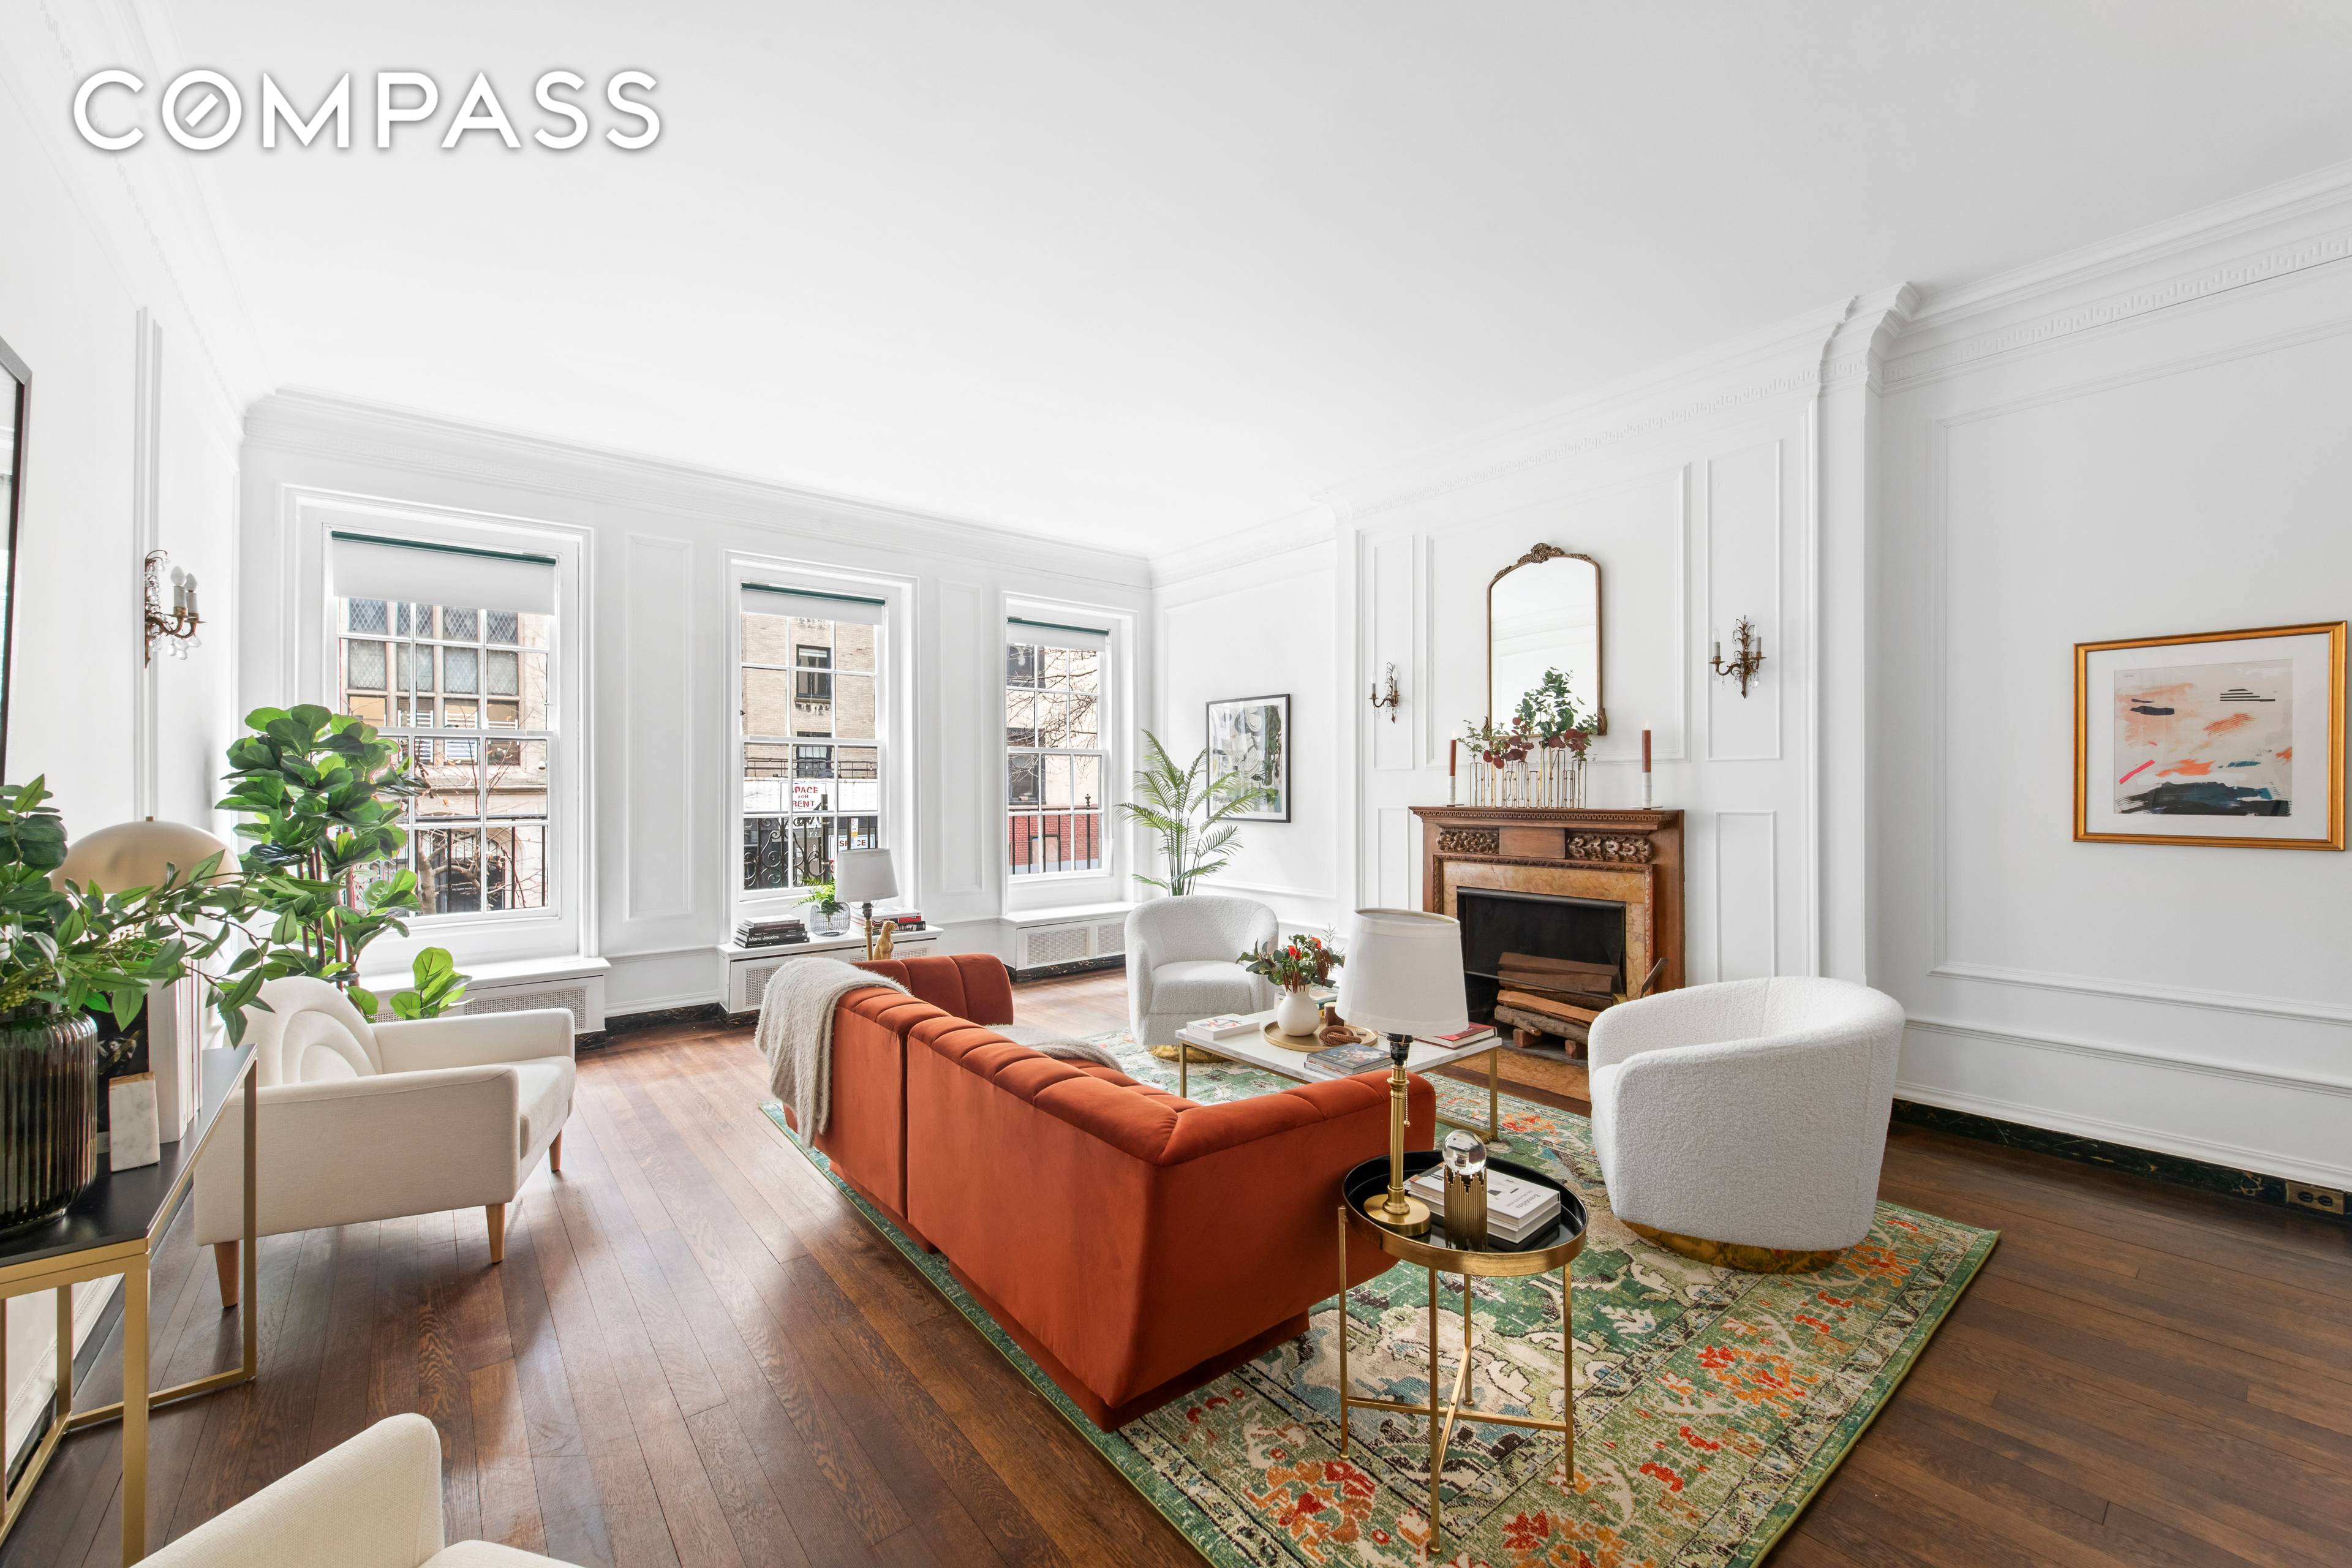 Step back in time to the roaring twenties, an era of prosperity and boundless possibilities, as you enter this exquisite historic townhome, built in 1920 and cherished by only two ...